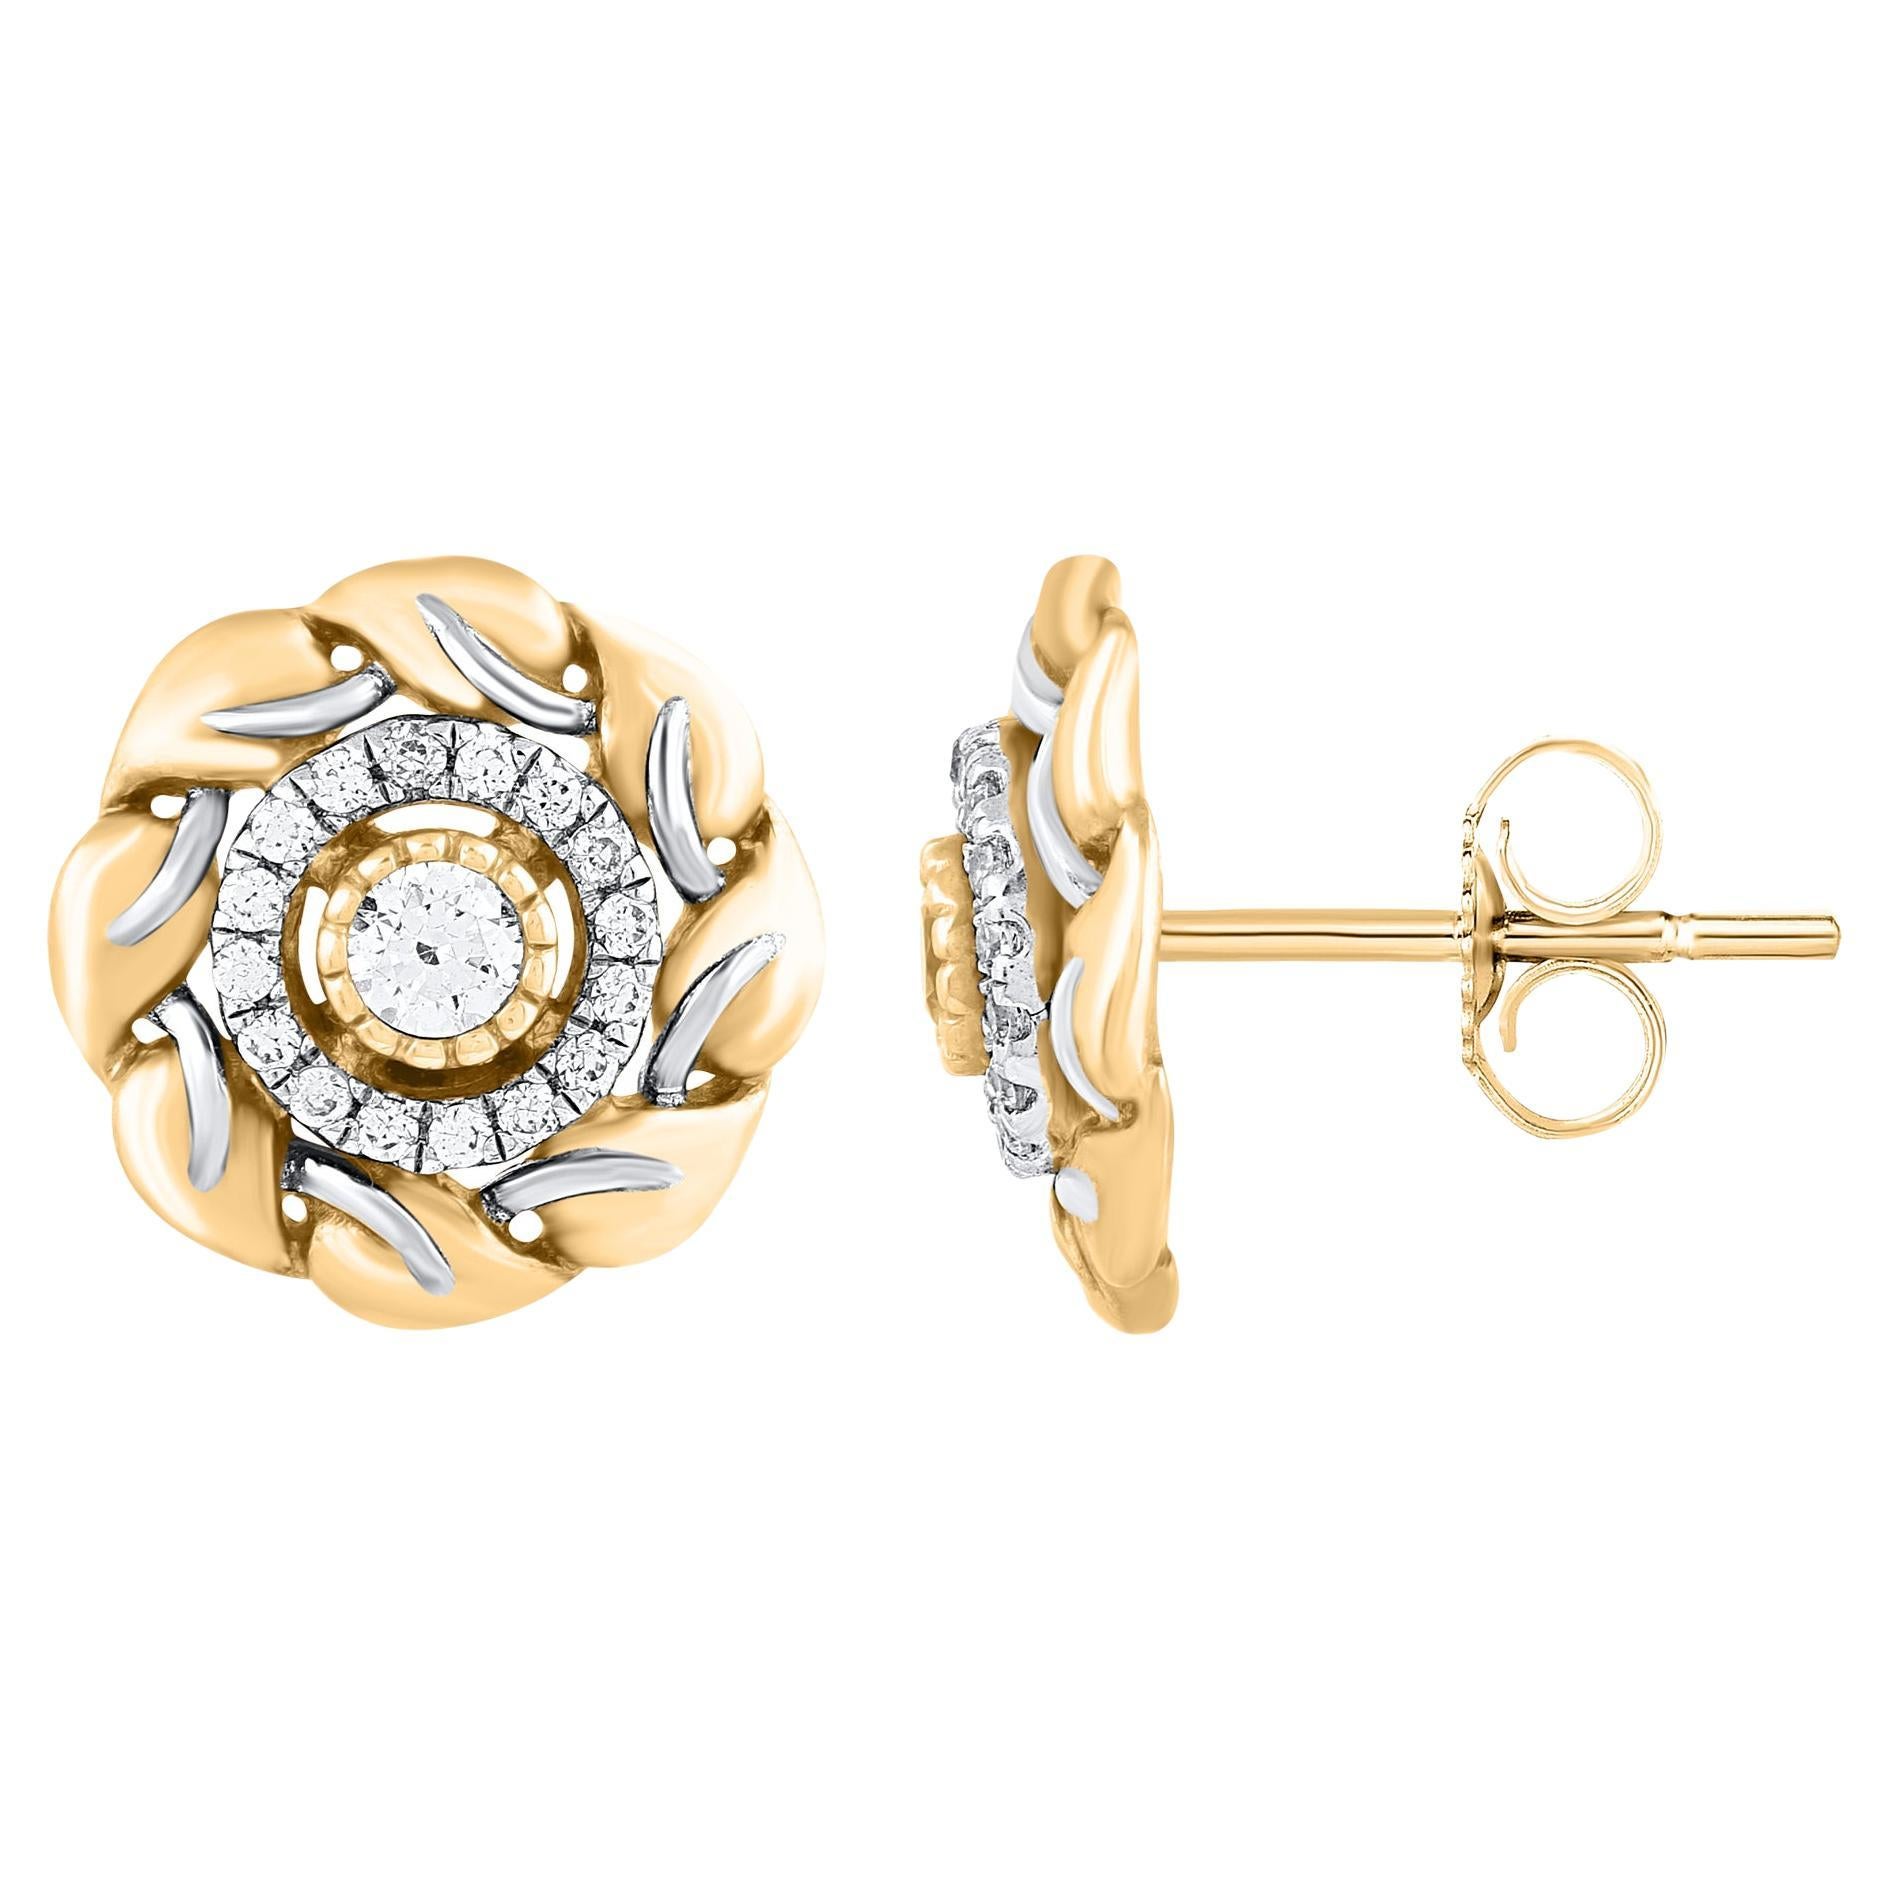 Timeless and elegant, these diamond stud earring are a style you'll wear with every look in your wardrobe. This earring is beautifully designed and studded with 34 round single cut and brilliant cut diamond set in prong setting. We only use natural,